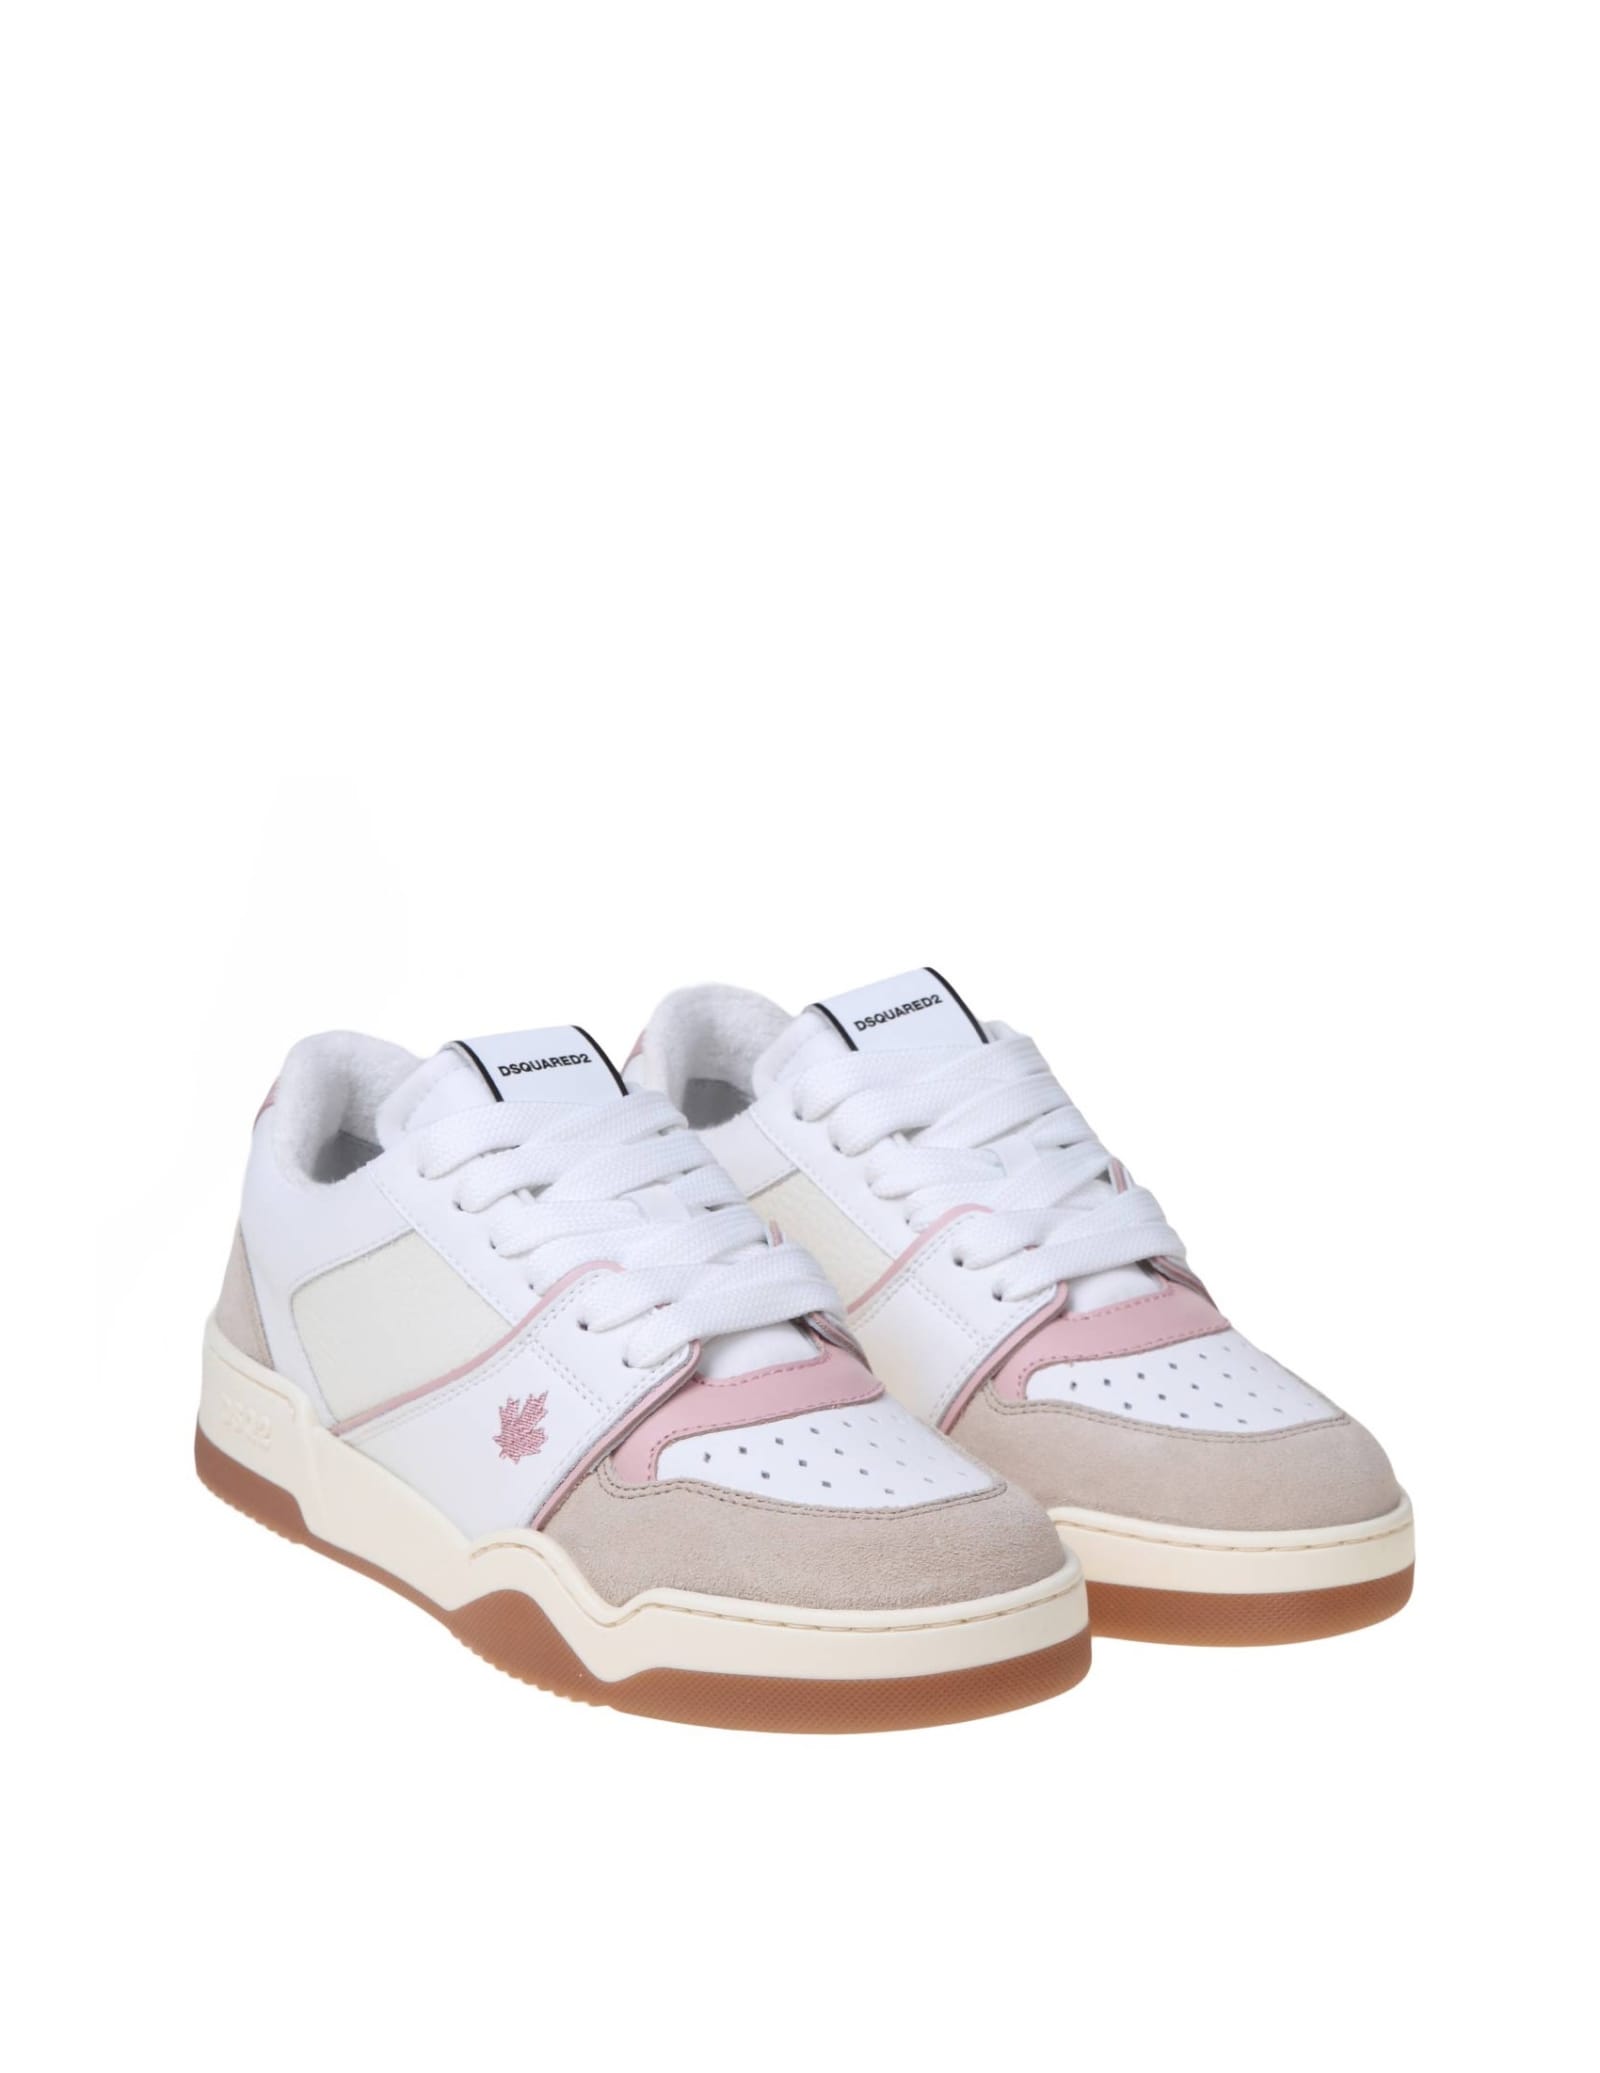 Shop Dsquared2 White And Pink Leather And Suede Sneakers In White/pink